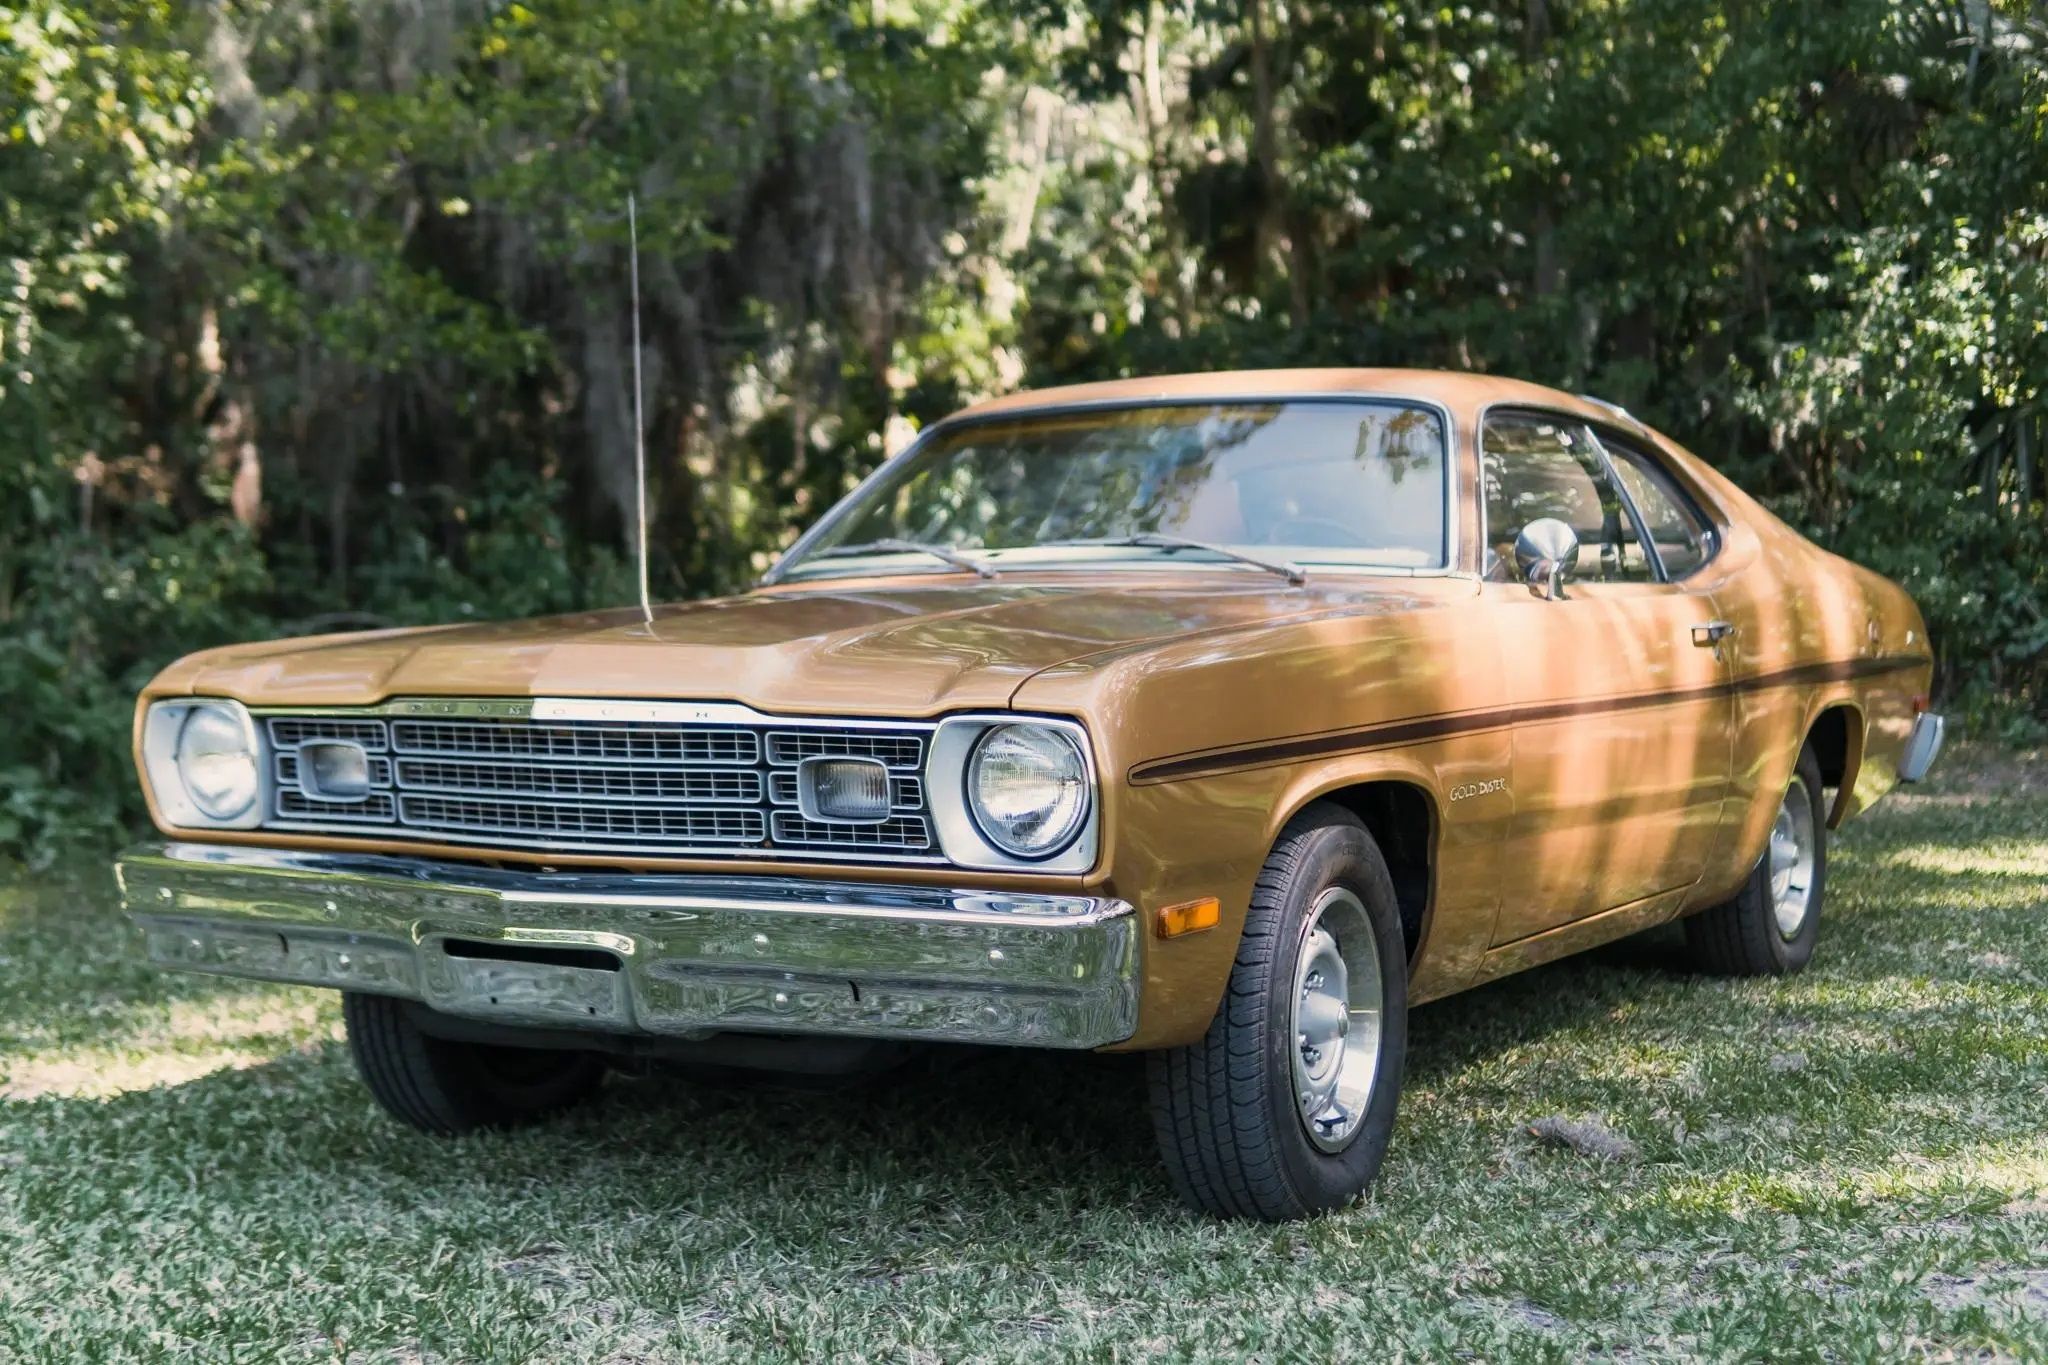 A parked 1974 Plymouth Duster